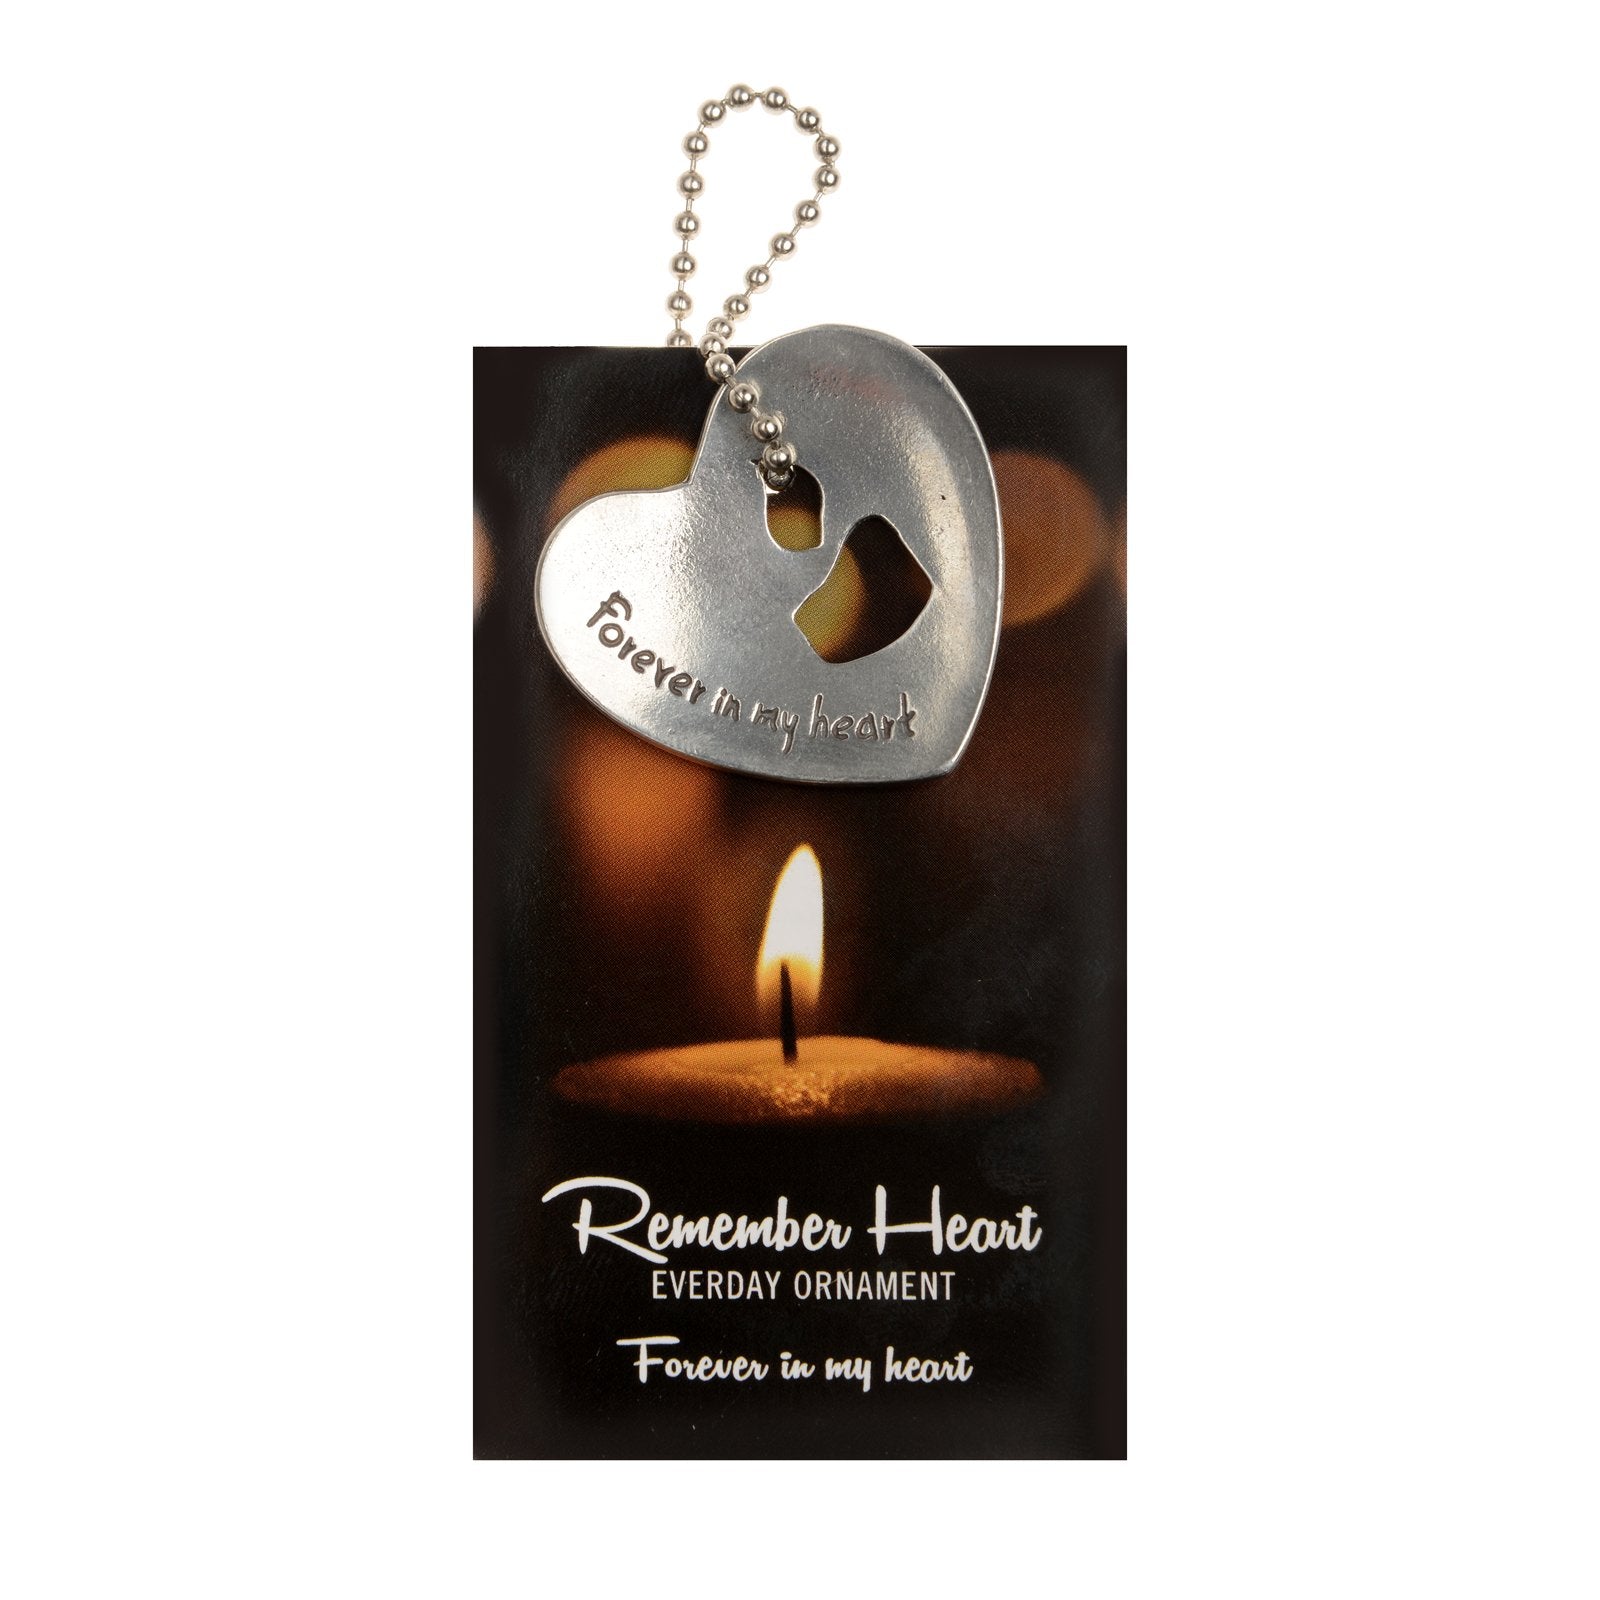 Everyday Ornament - Candle Card with Remember Heart & Chain